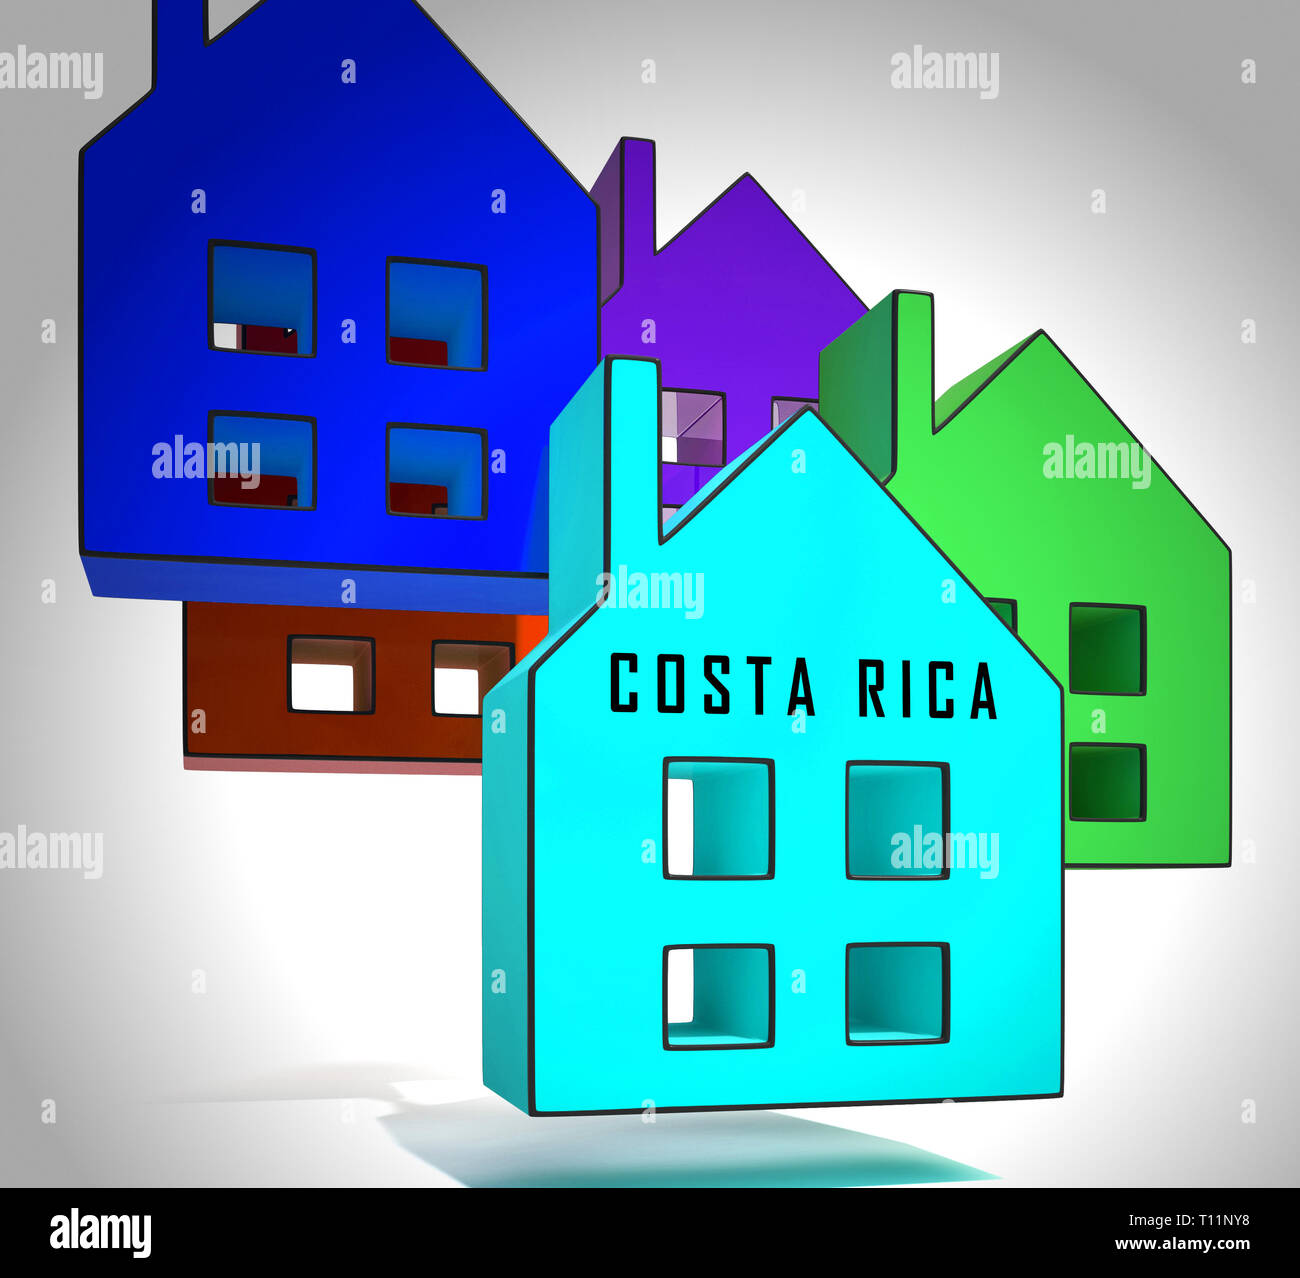 Costa Rica Homes Icon Depicts Real Estate Or Investment Property. Luxury Residential Buying And Ownership - 3d Illustration Stock Photo